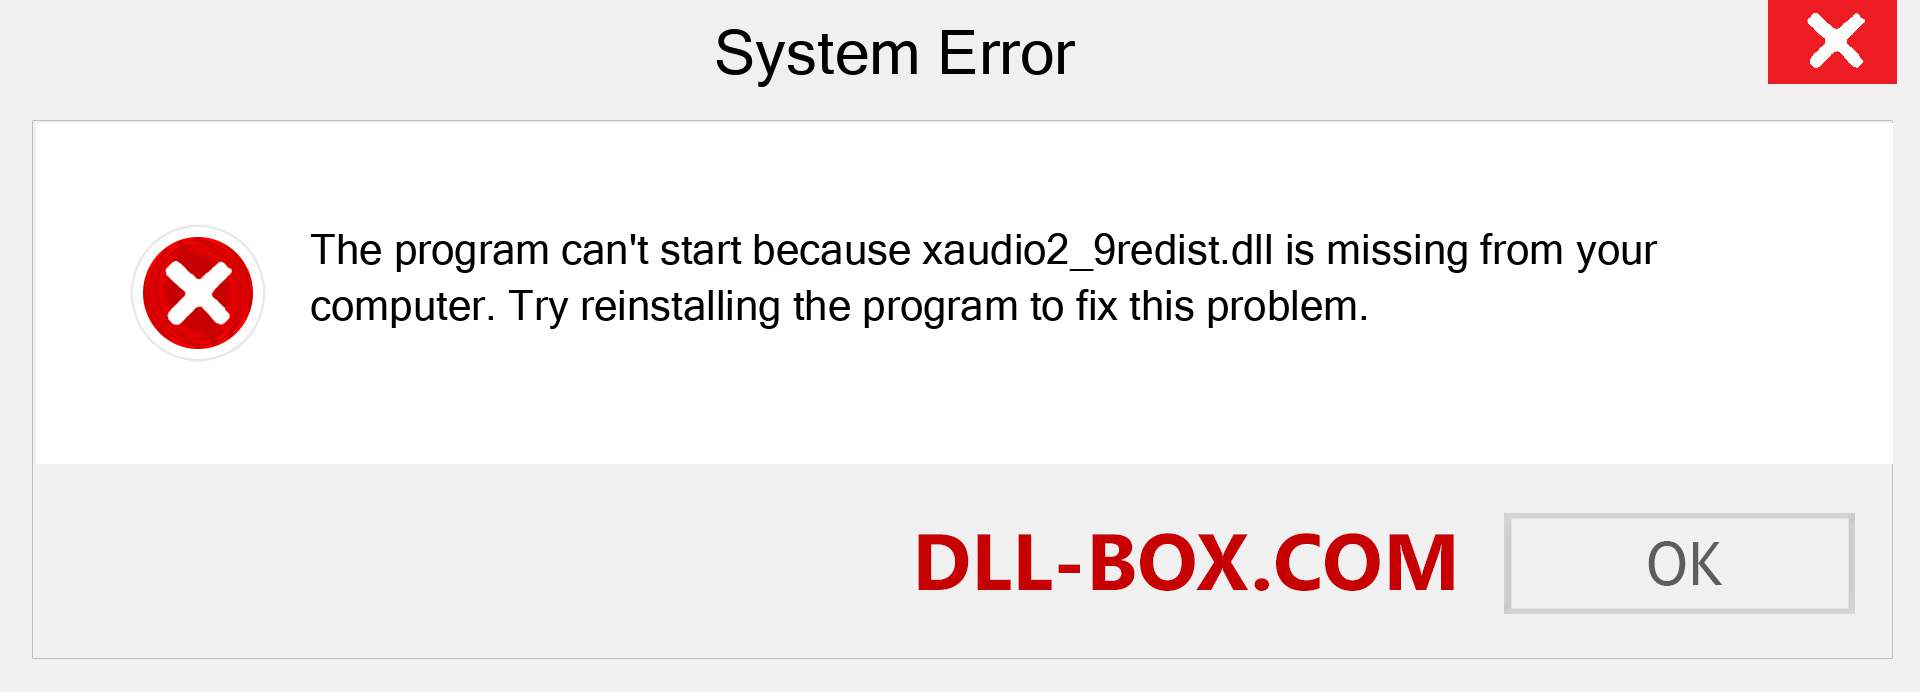  xaudio2_9redist.dll file is missing?. Download for Windows 7, 8, 10 - Fix  xaudio2_9redist dll Missing Error on Windows, photos, images